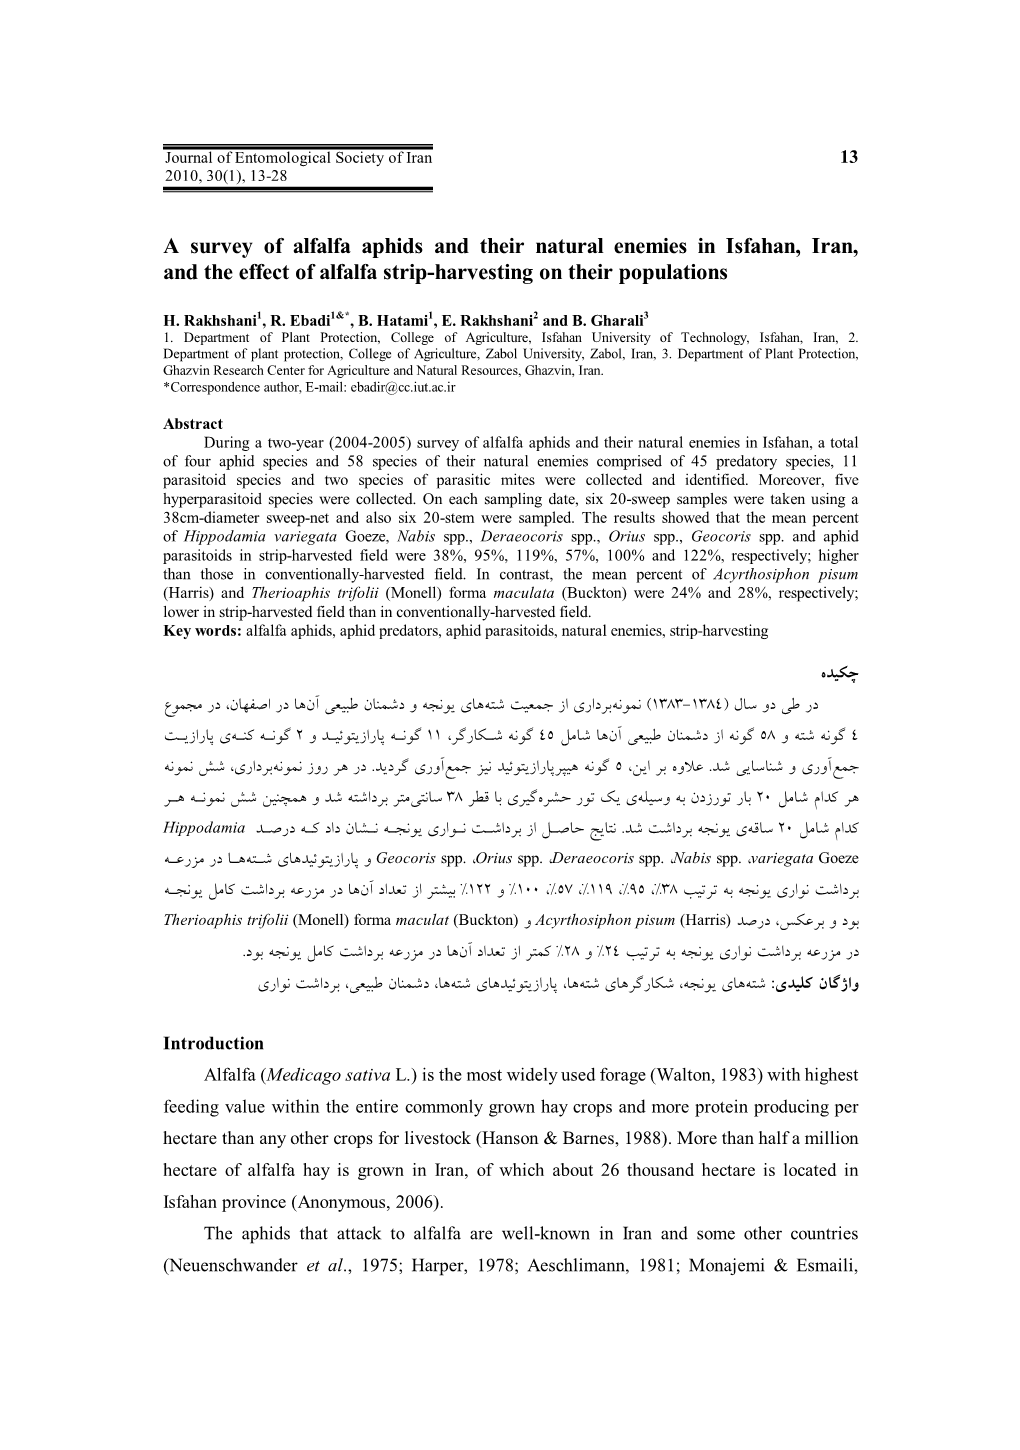 A Survey of Alfalfa Aphids and Their Natural Enemies in Isfahan, Iran, and the Effect of Alfalfa Strip-Harvesting on Their Populations